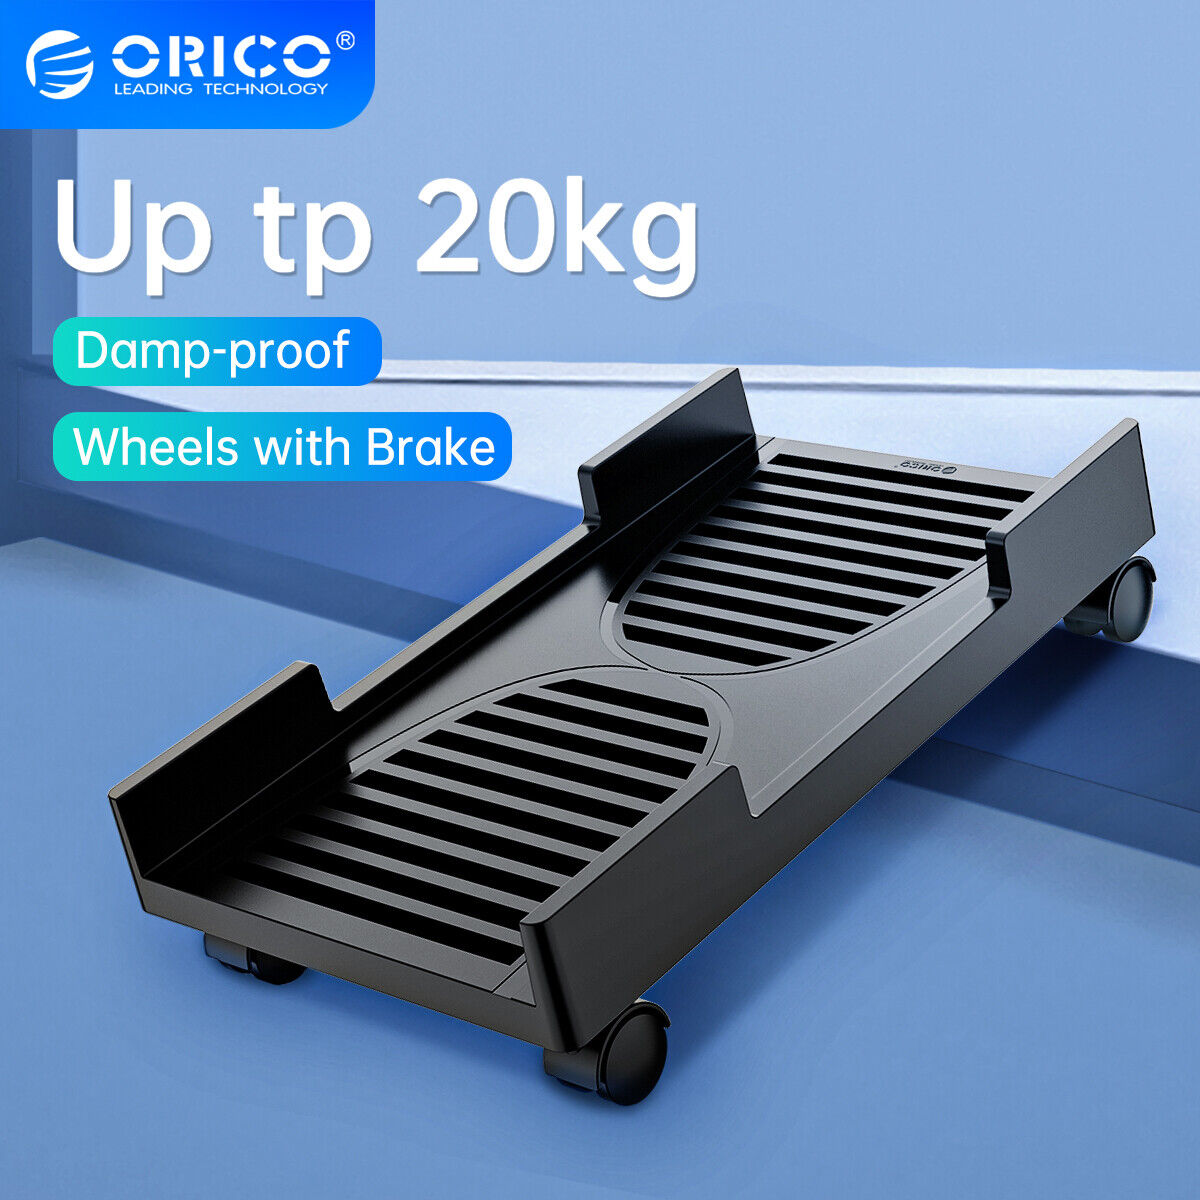 ORICO Mobile CPU Stand,Adjustable Computer Tower Stand with Locking Caster Wheel